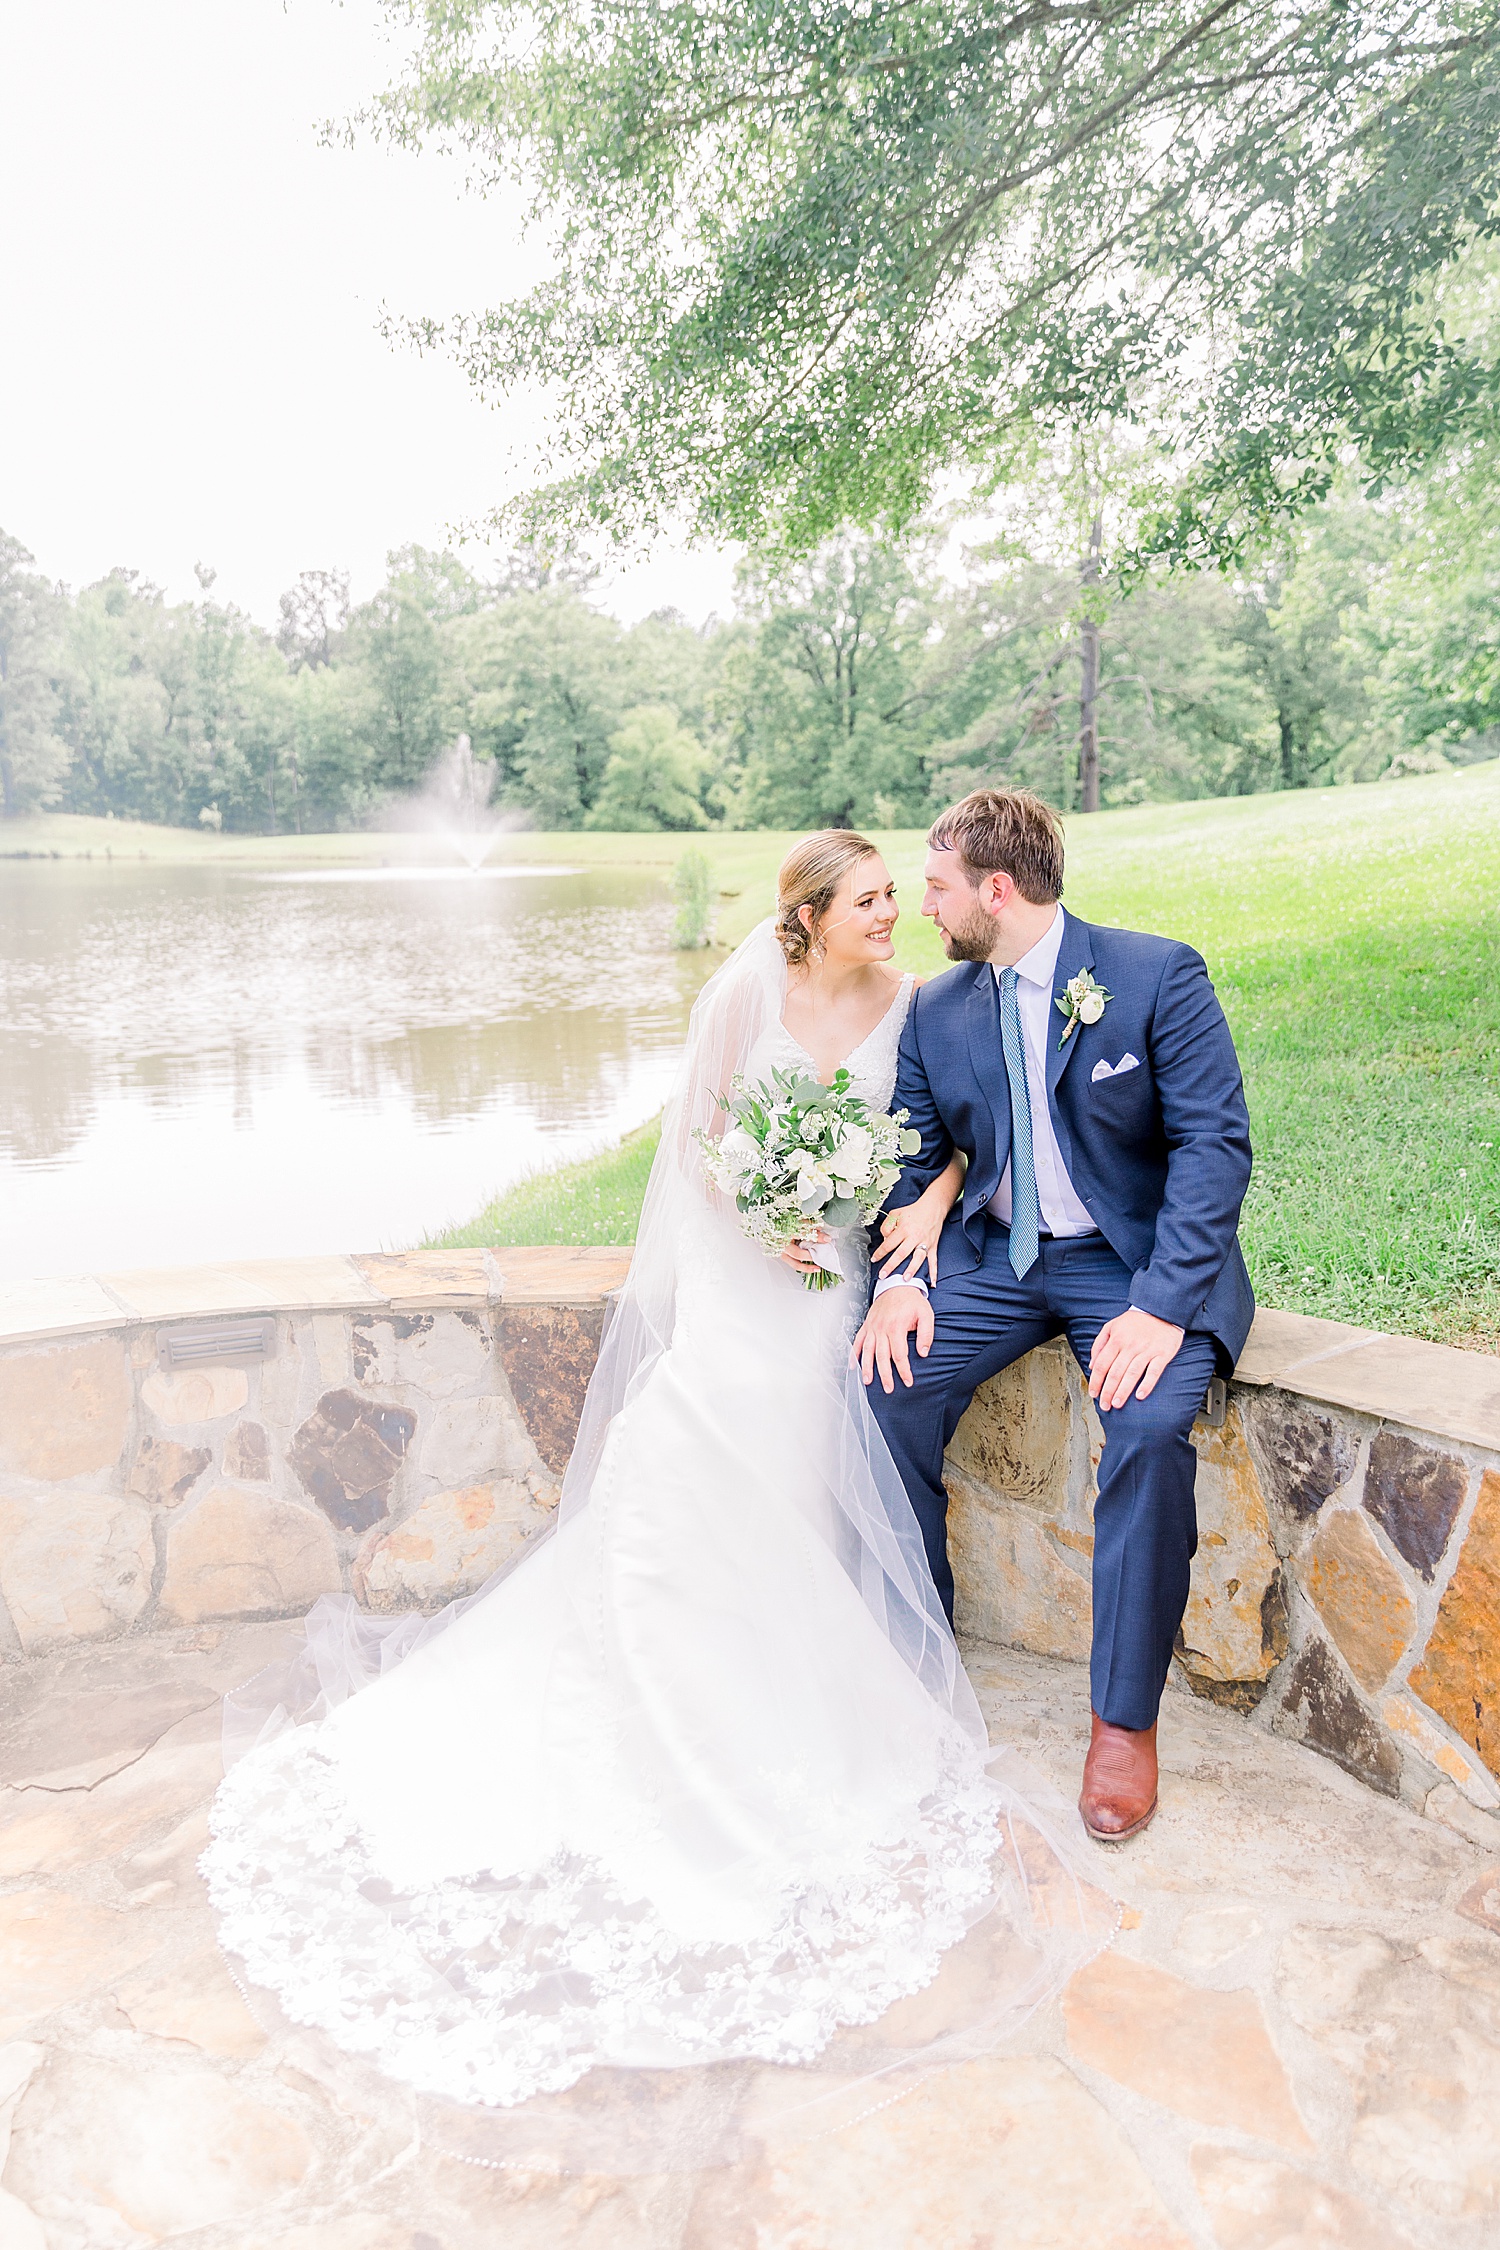 newlyweds share intimate moment sitting on decorative stone wall at Belle farms